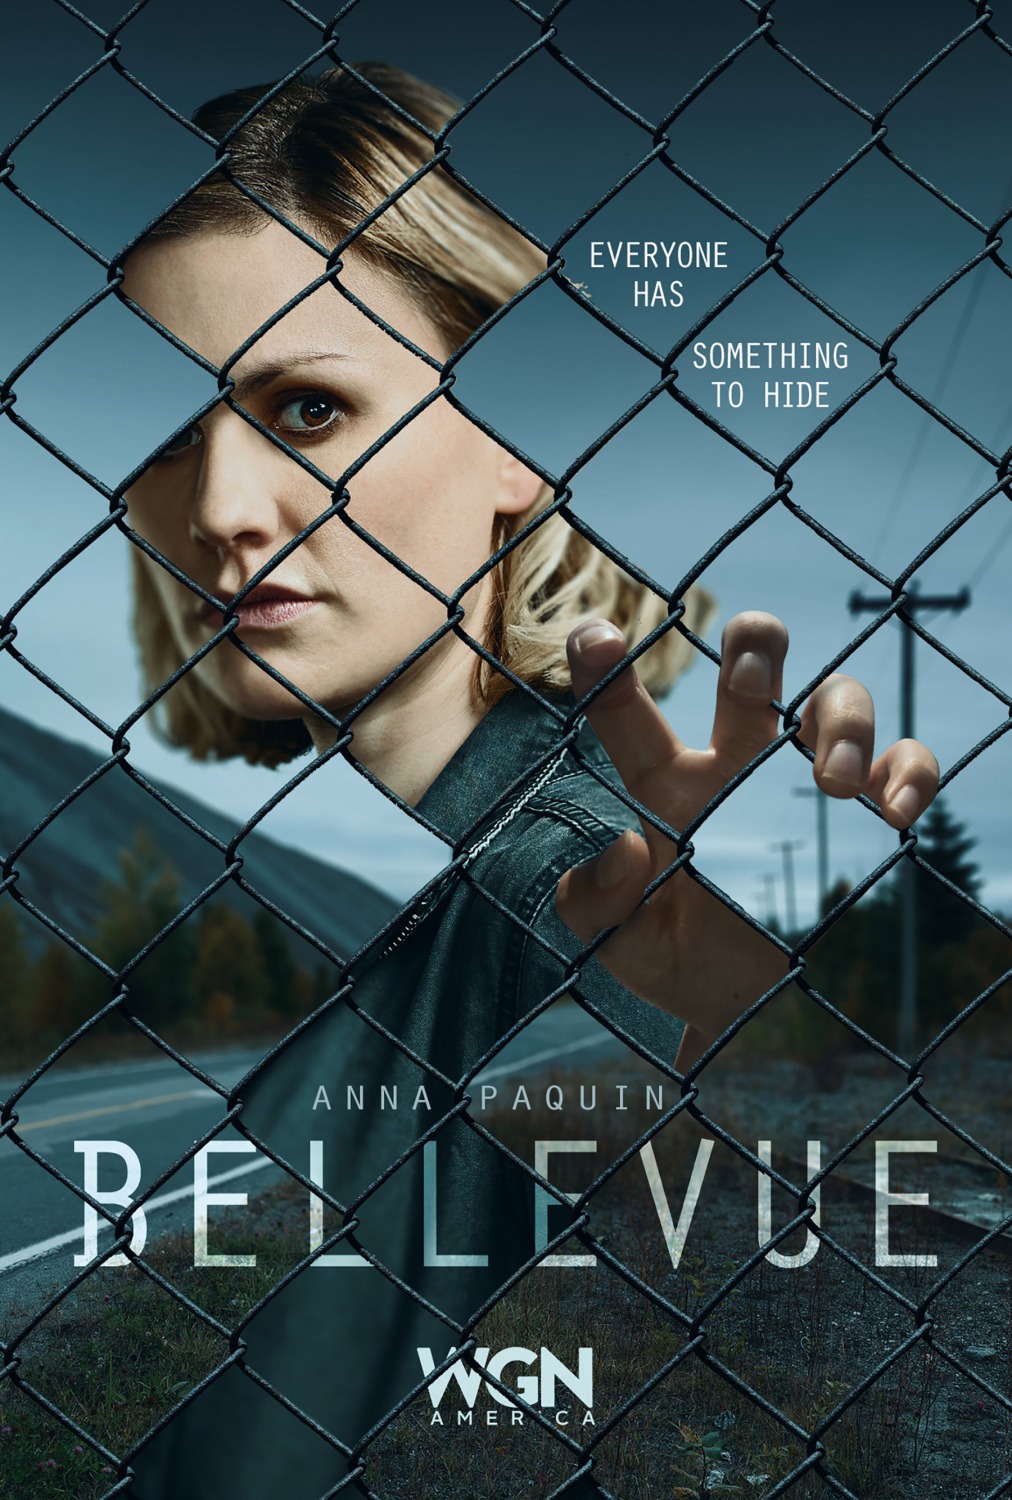 Extra Large TV Poster Image for Bellevue (#4 of 4)